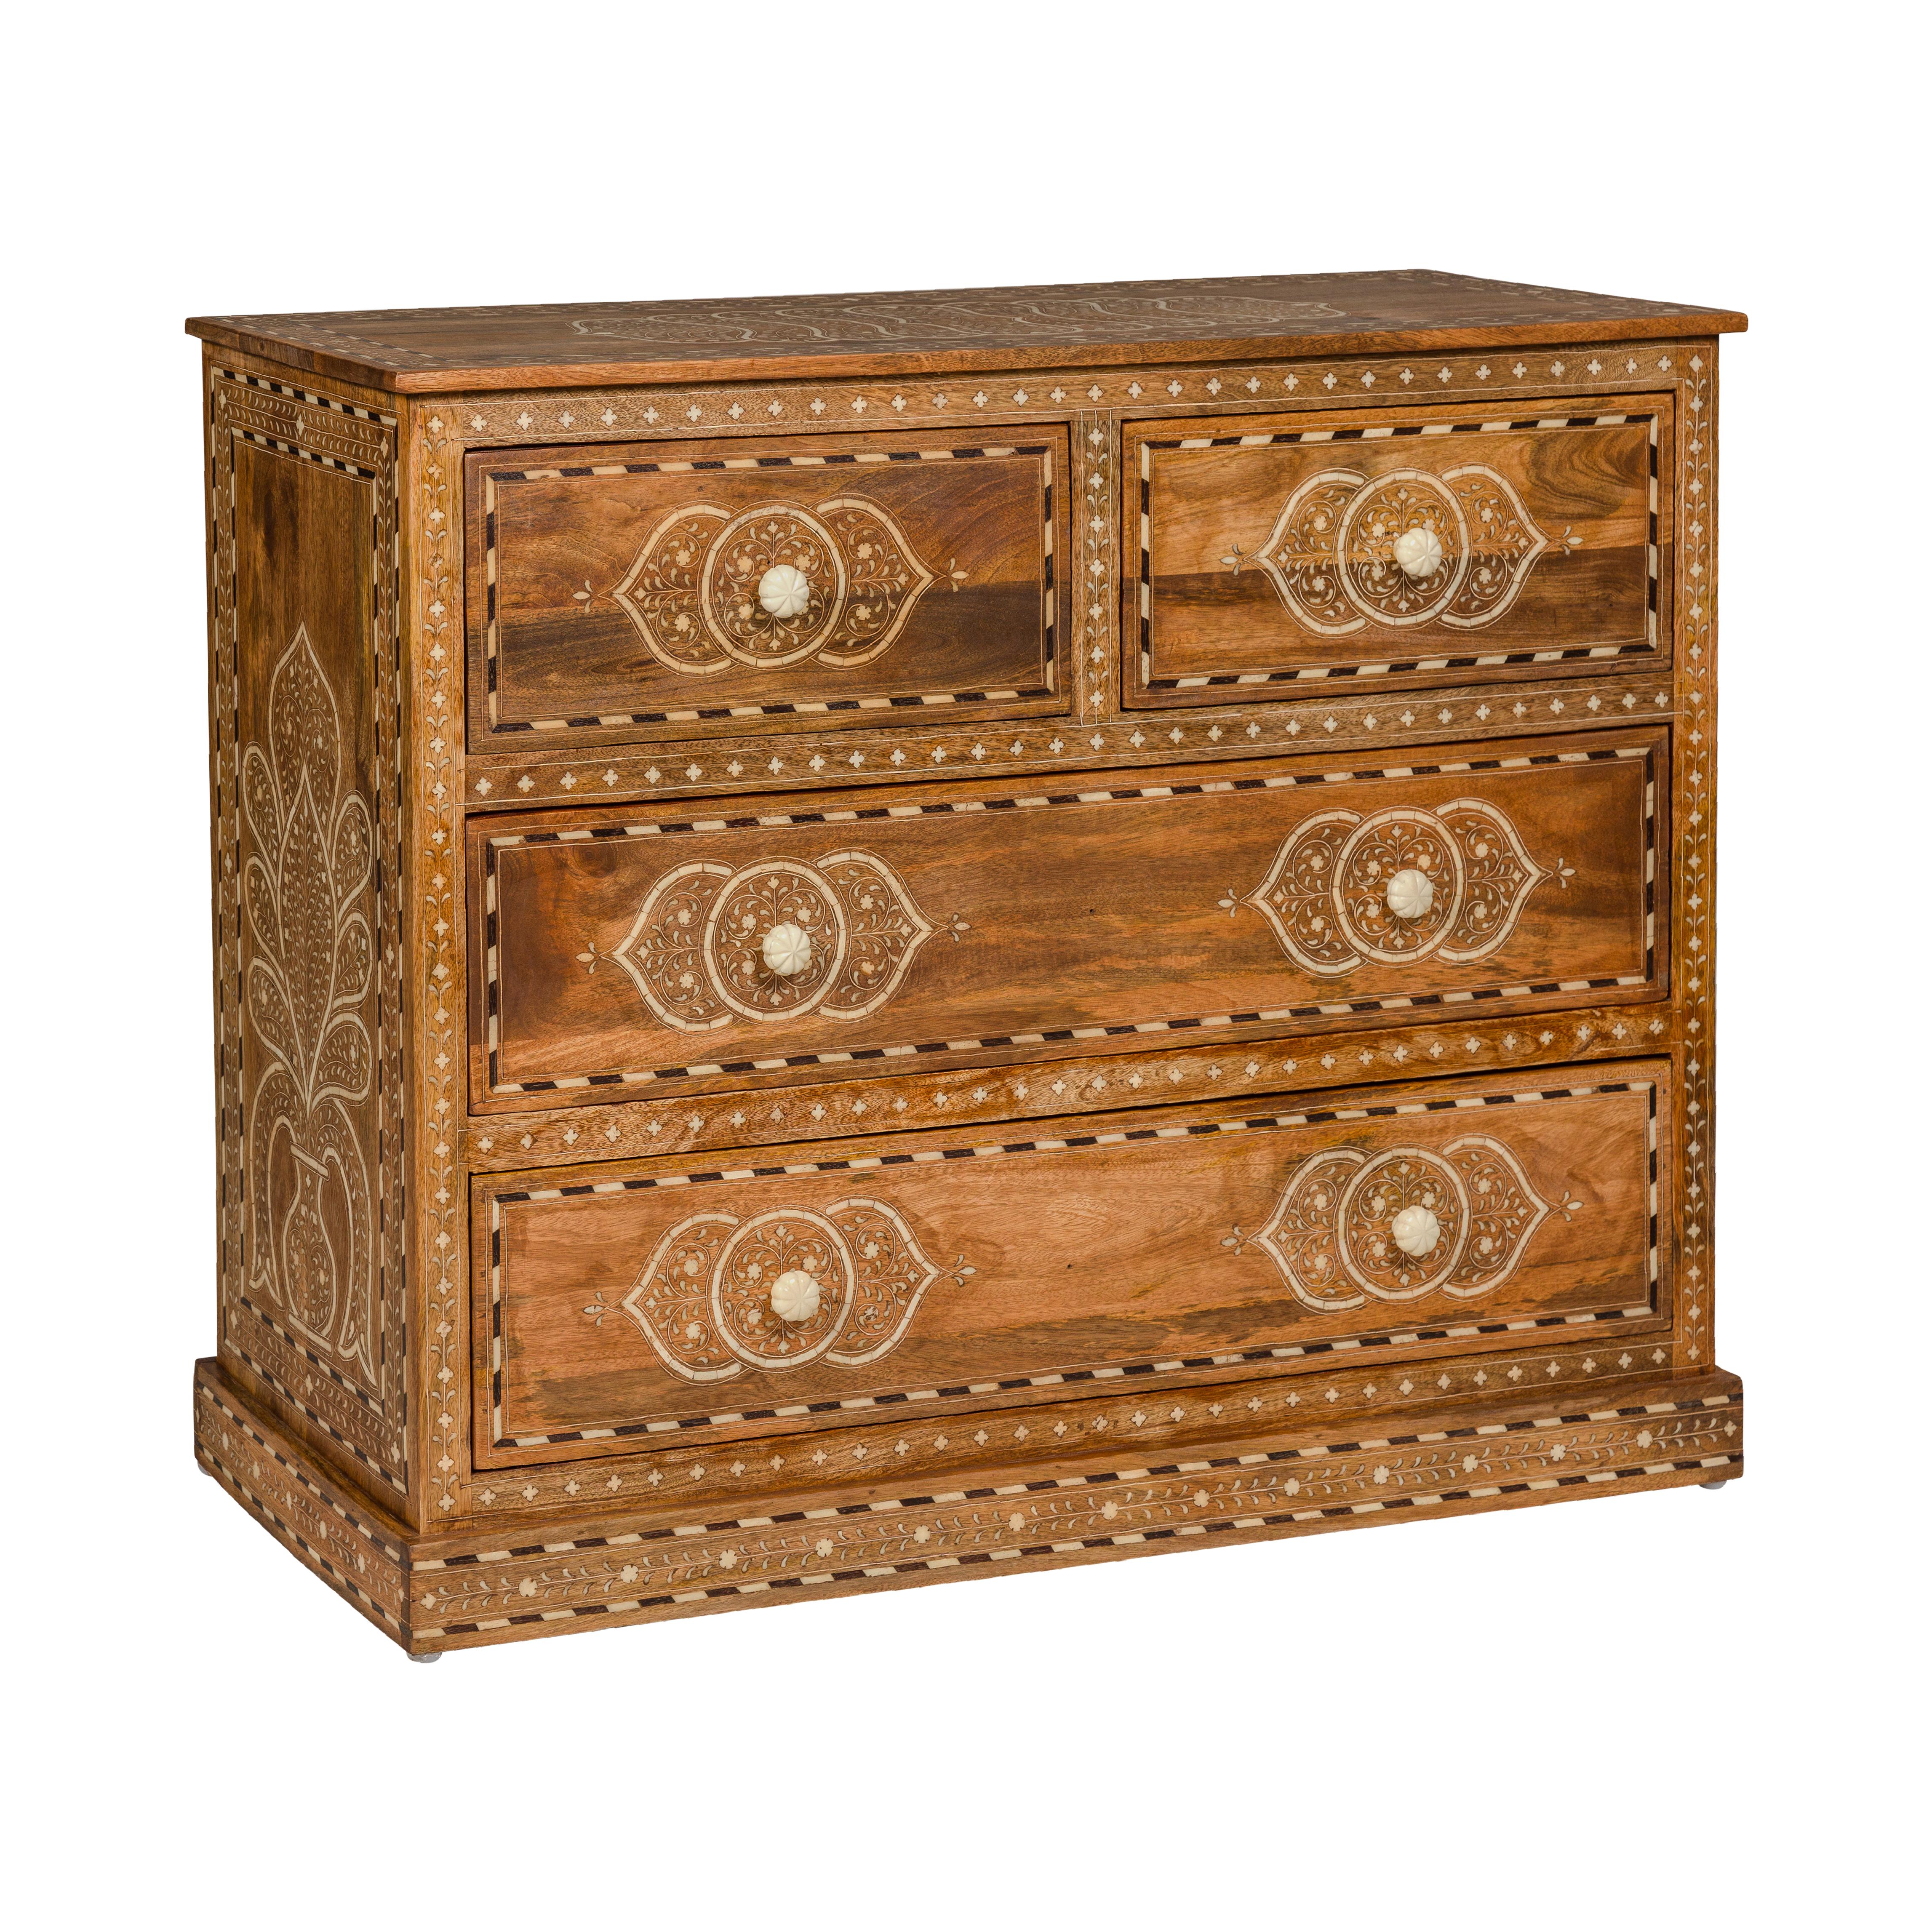 Anglo Indian Style Mango Wood Chest with Four Drawers and Floral Bone Inlay For Sale 12